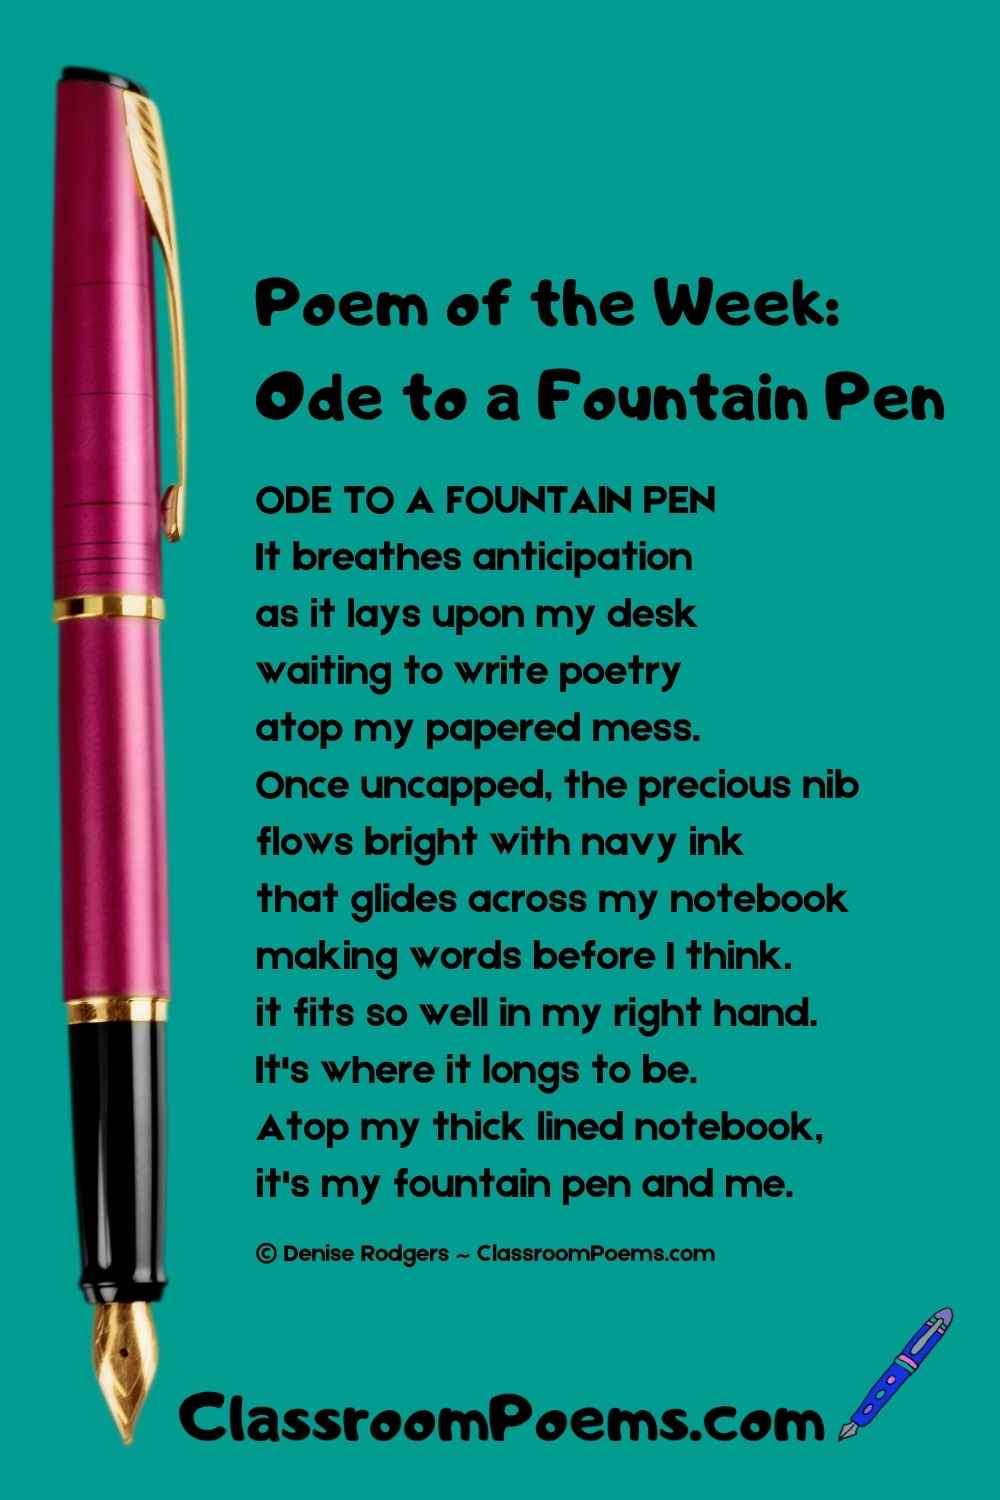 ODE TO A FOUNTAIN PEN, a poem by Denise Rodgers, on ClassroomPoems.com.